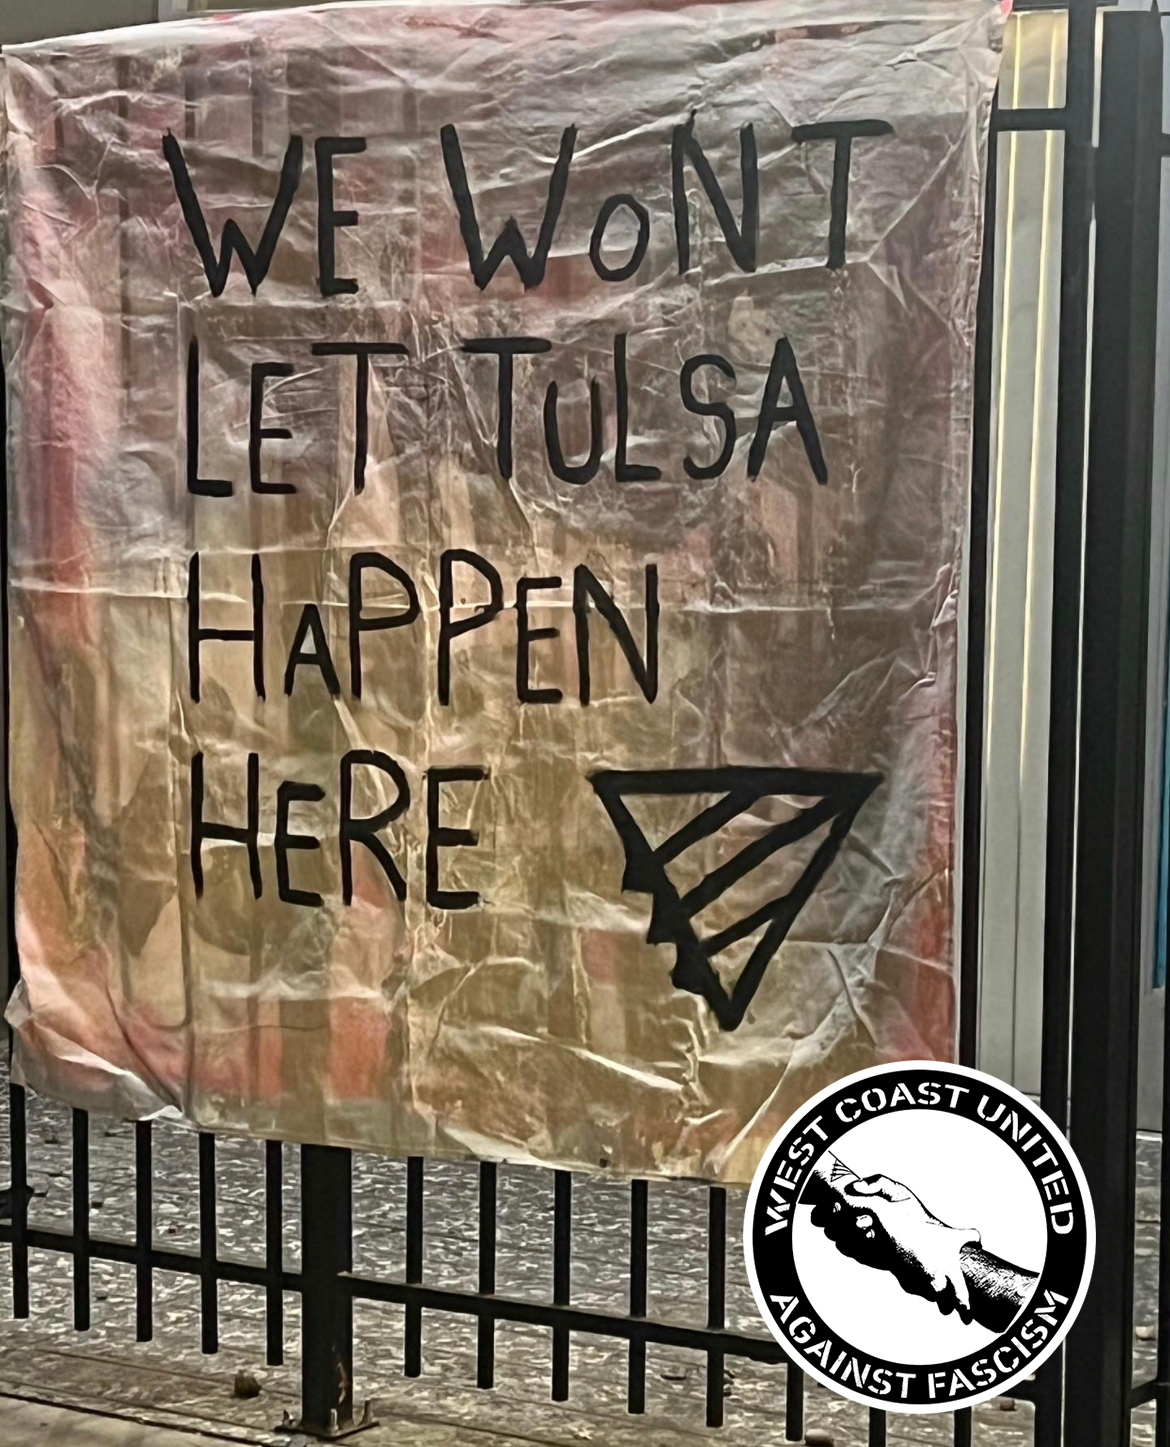 A metal fence line has a banner hanging from it that reads "We wont let Tulsa Happen Here." with a queer front painted on.